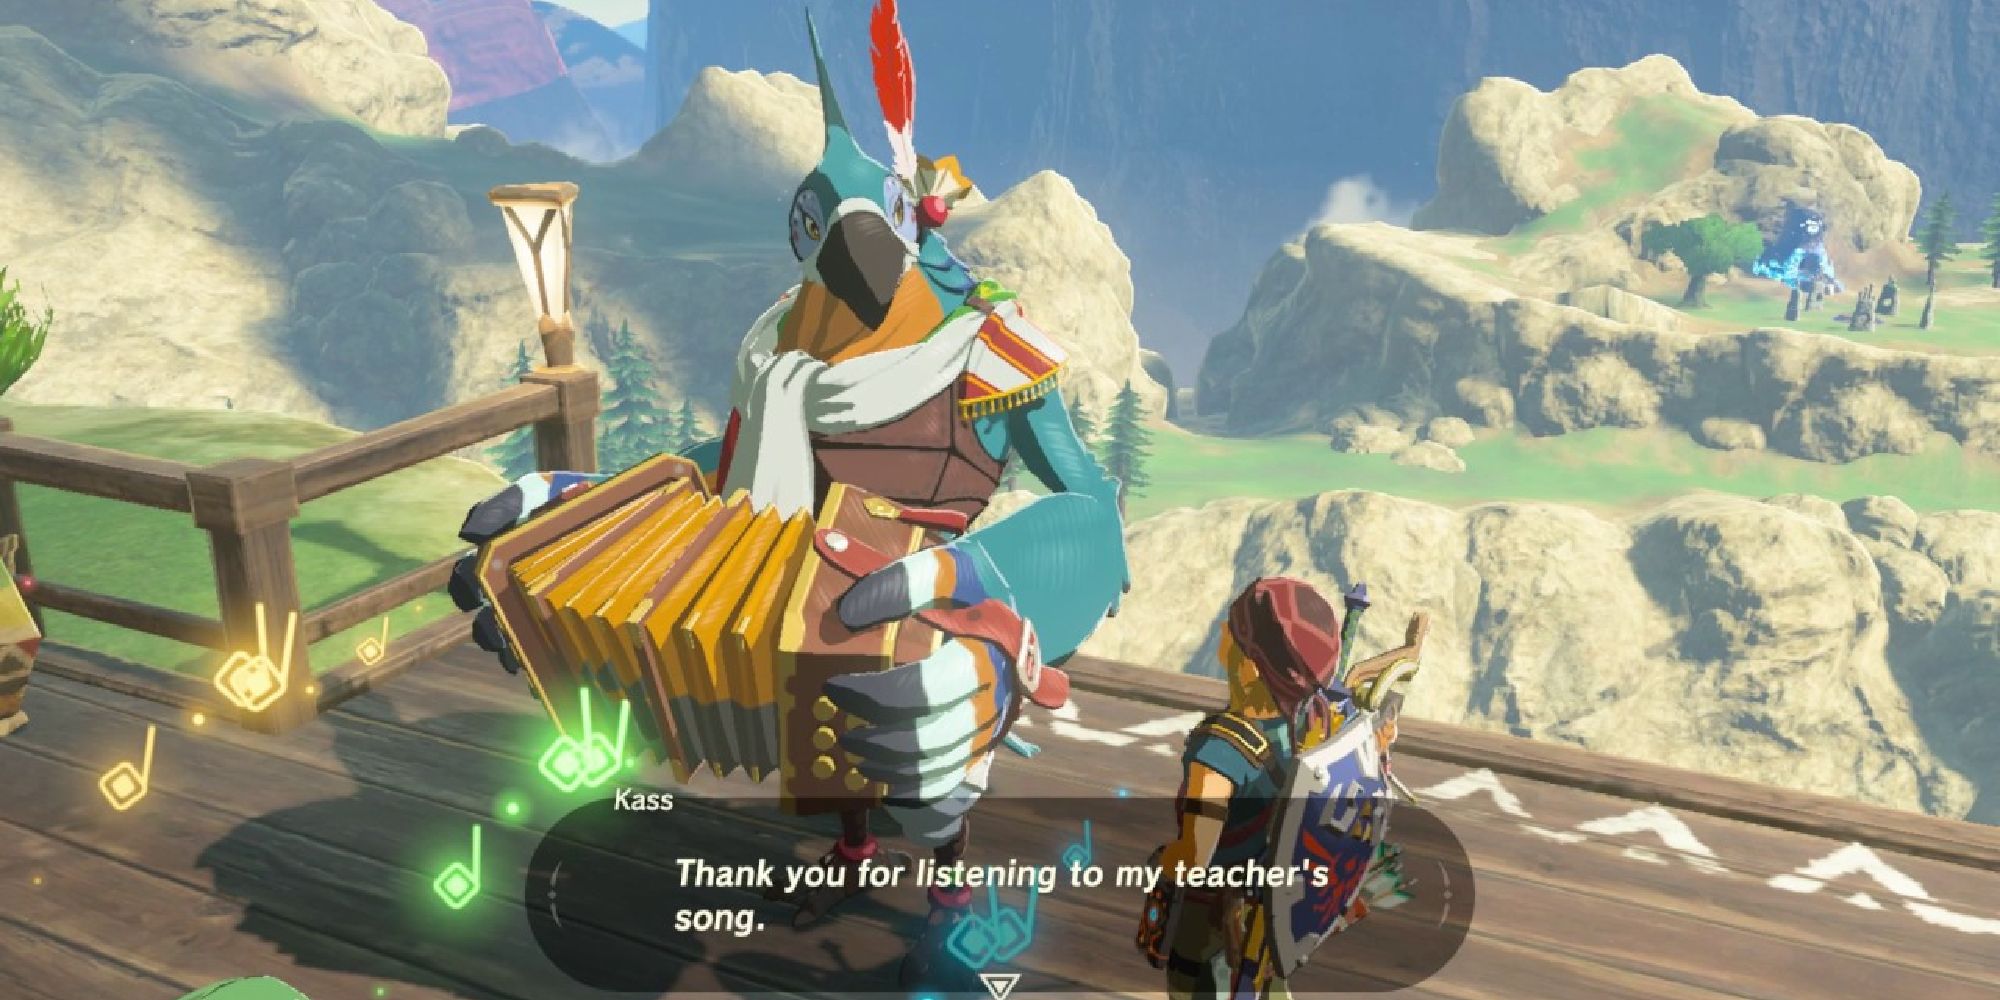 Kass thanking Link for listening to his teacher's song in BOTW